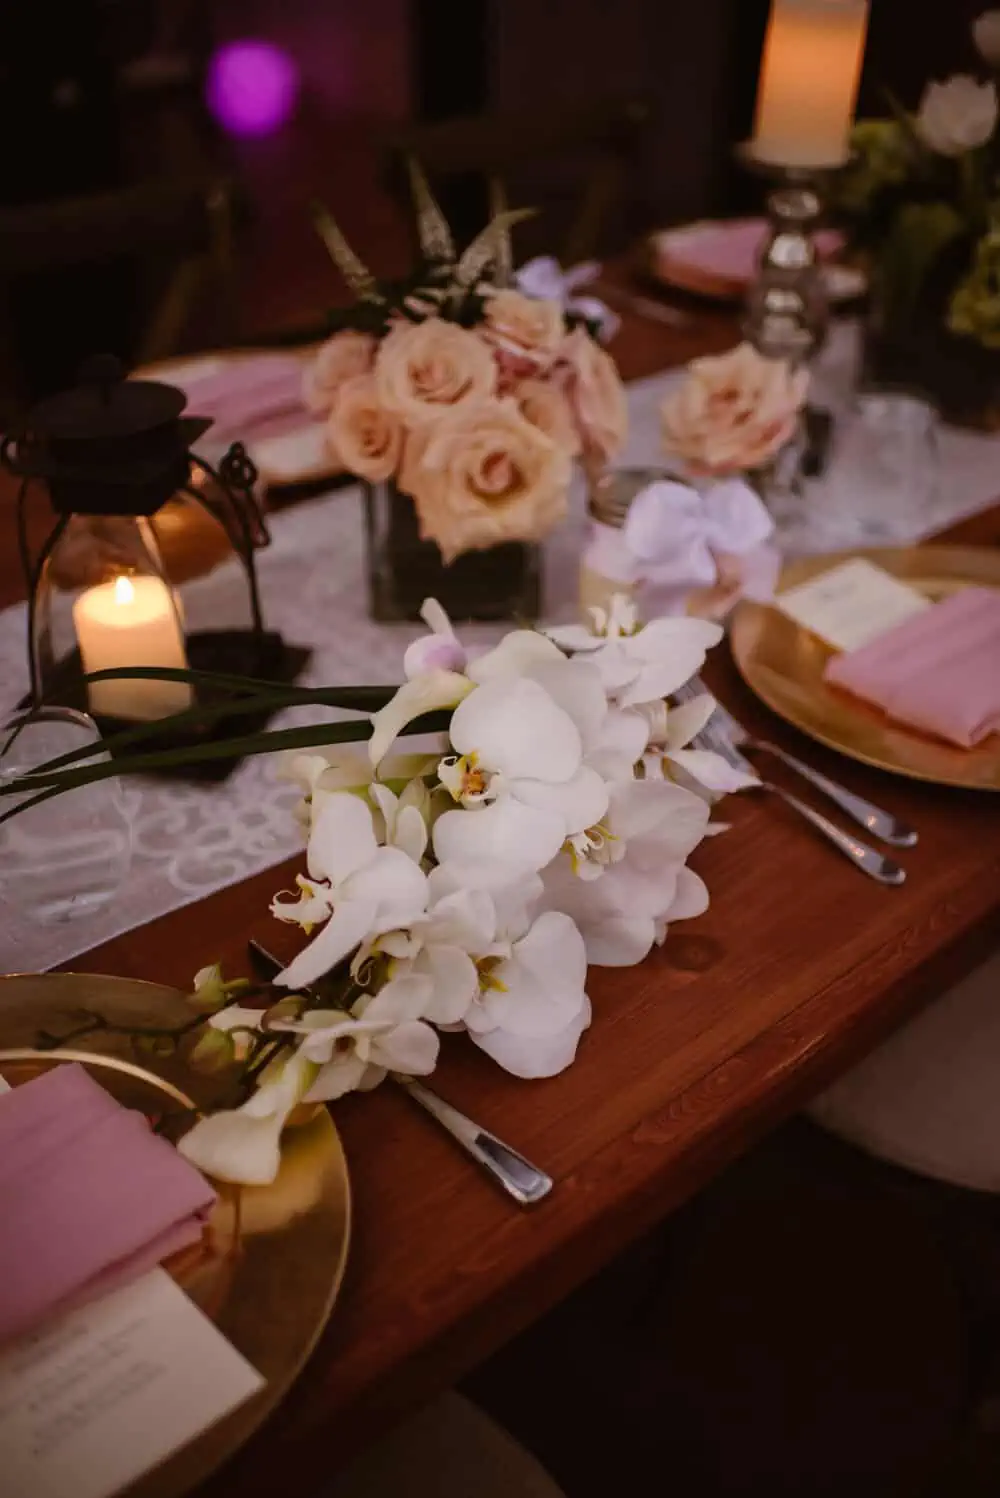 A table layout with flowers, dinner plates and other items for a wedding dinner.